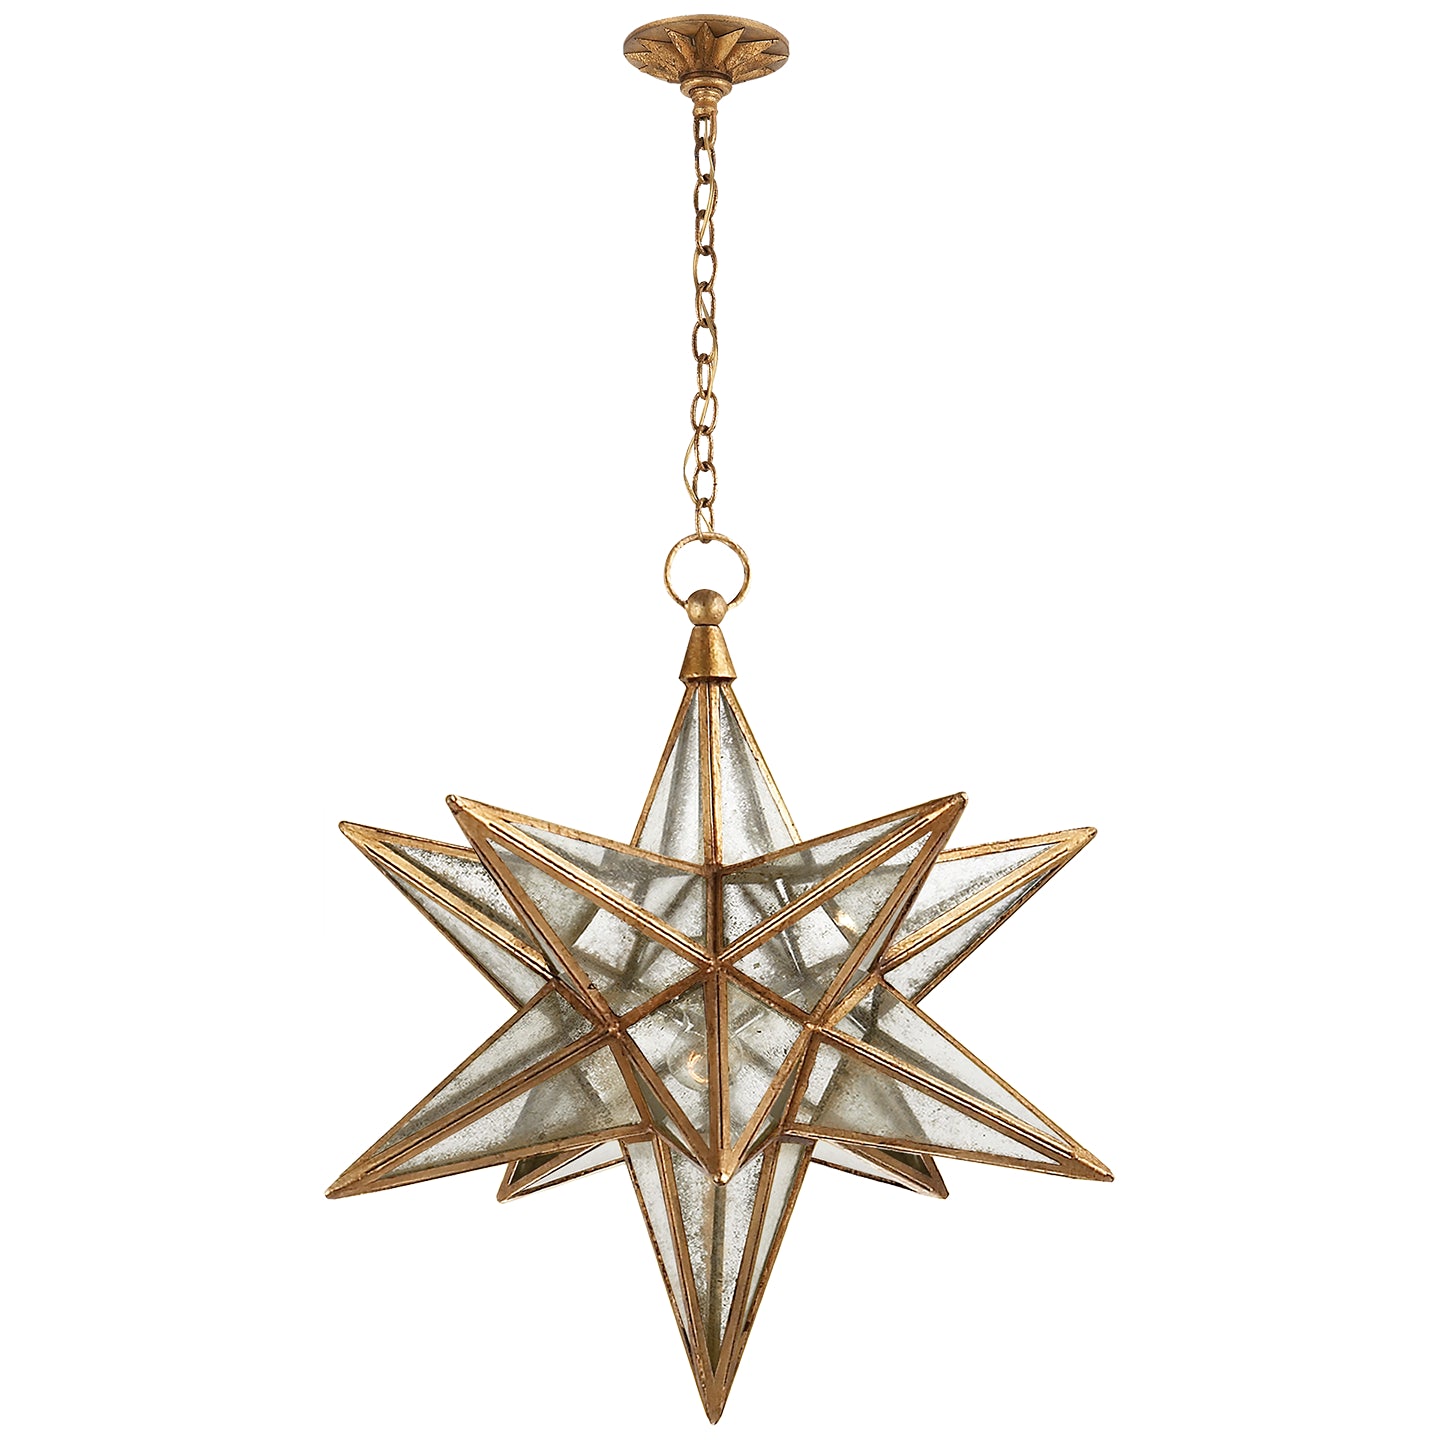 Load image into Gallery viewer, Visual Comfort Signature - CHC 5212GI-AM - One Light Lantern - Moravian Star - Gilded Iron
